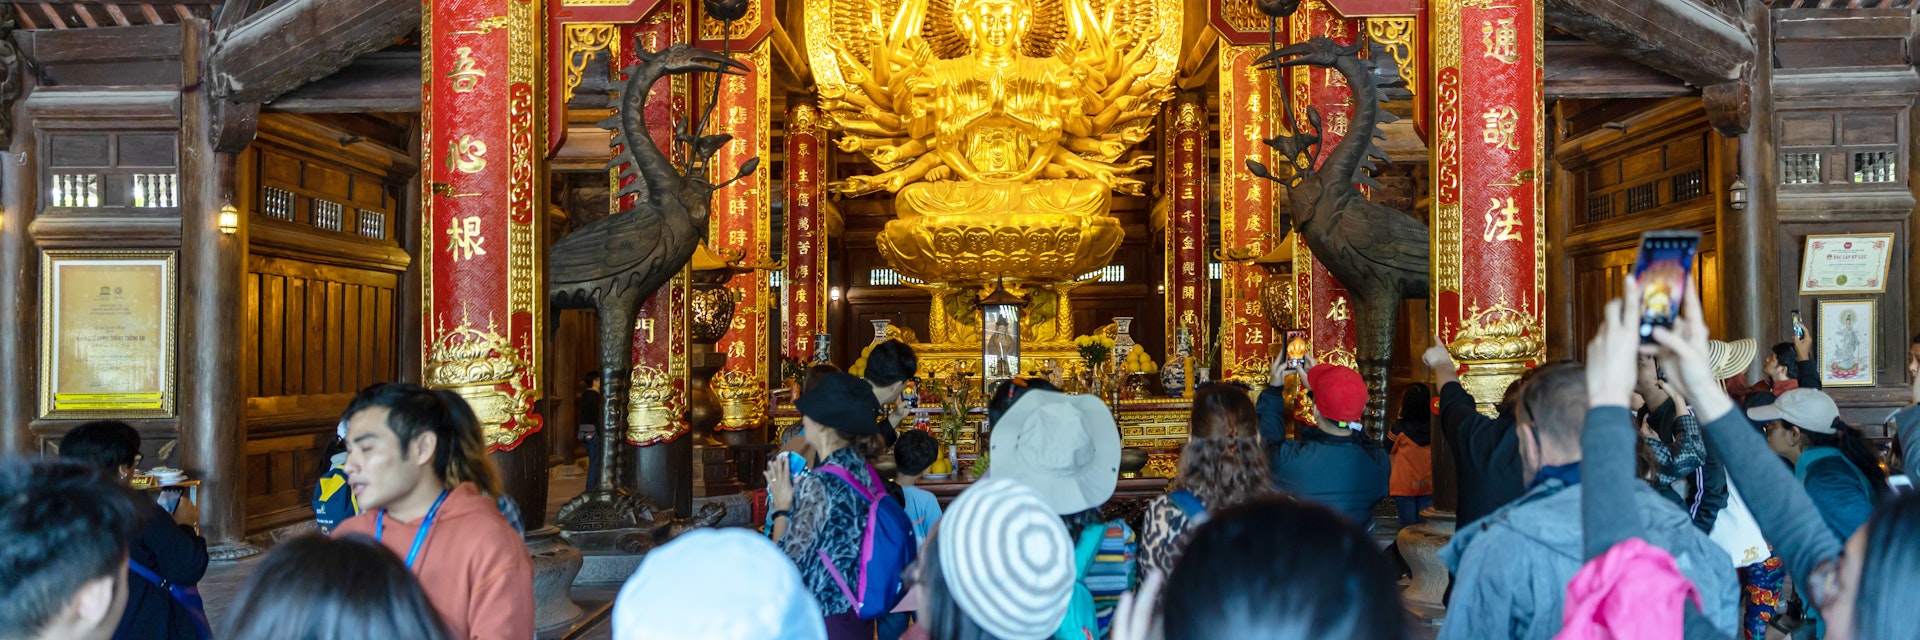 Interior view of building with golden sculpture at Chua Bai Dinh Pagoda is the largest complex of Buddhist temple in country.